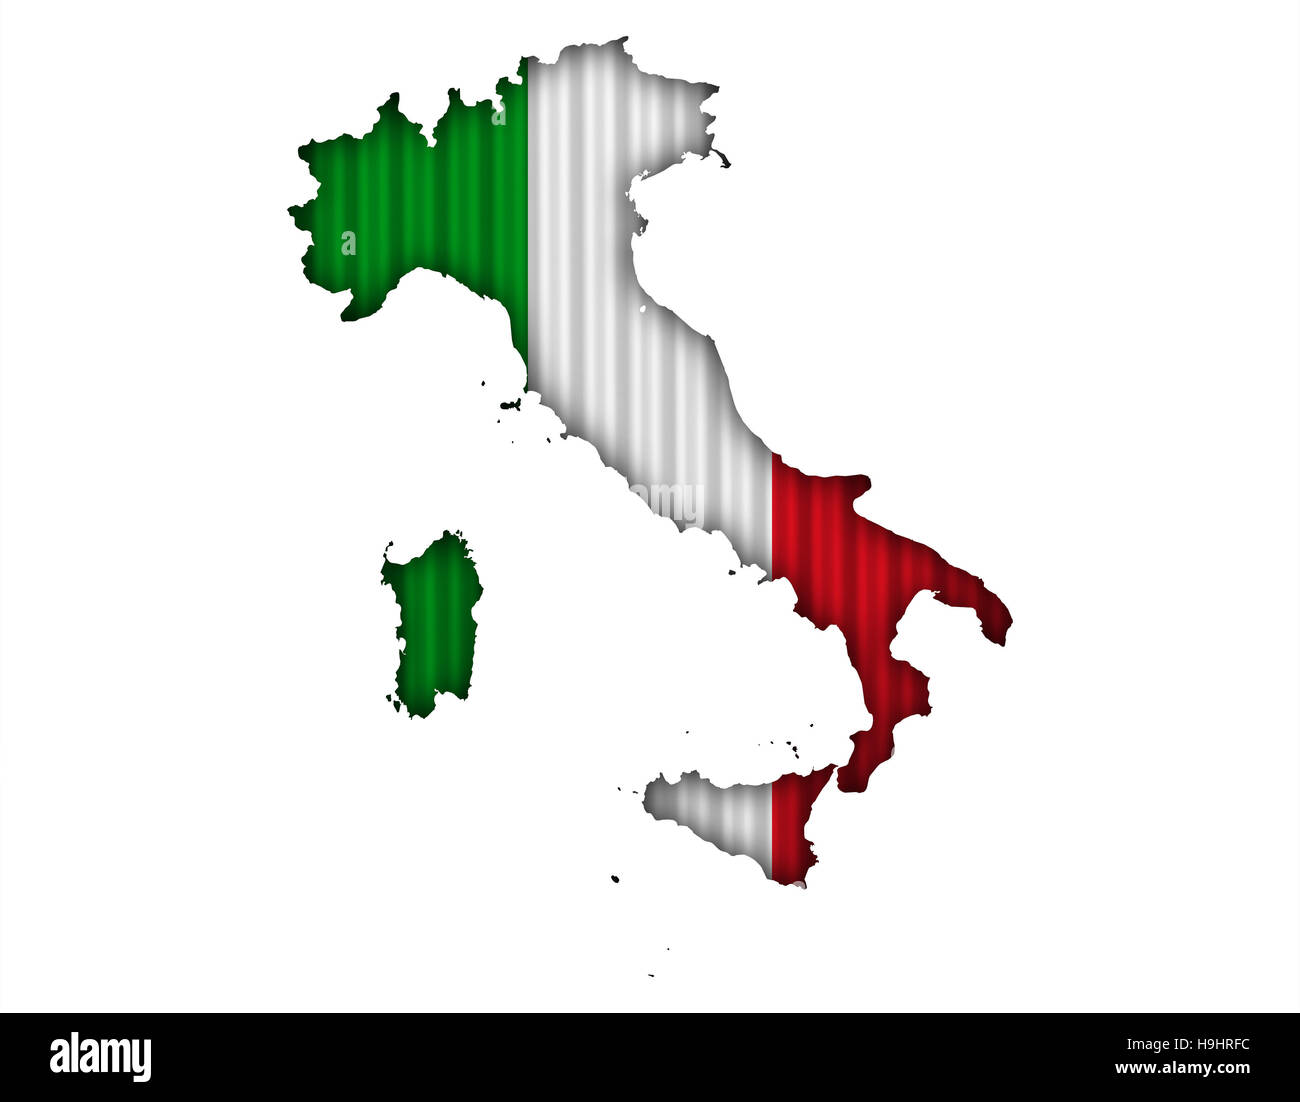 Map and flag of Italy Stock Photo